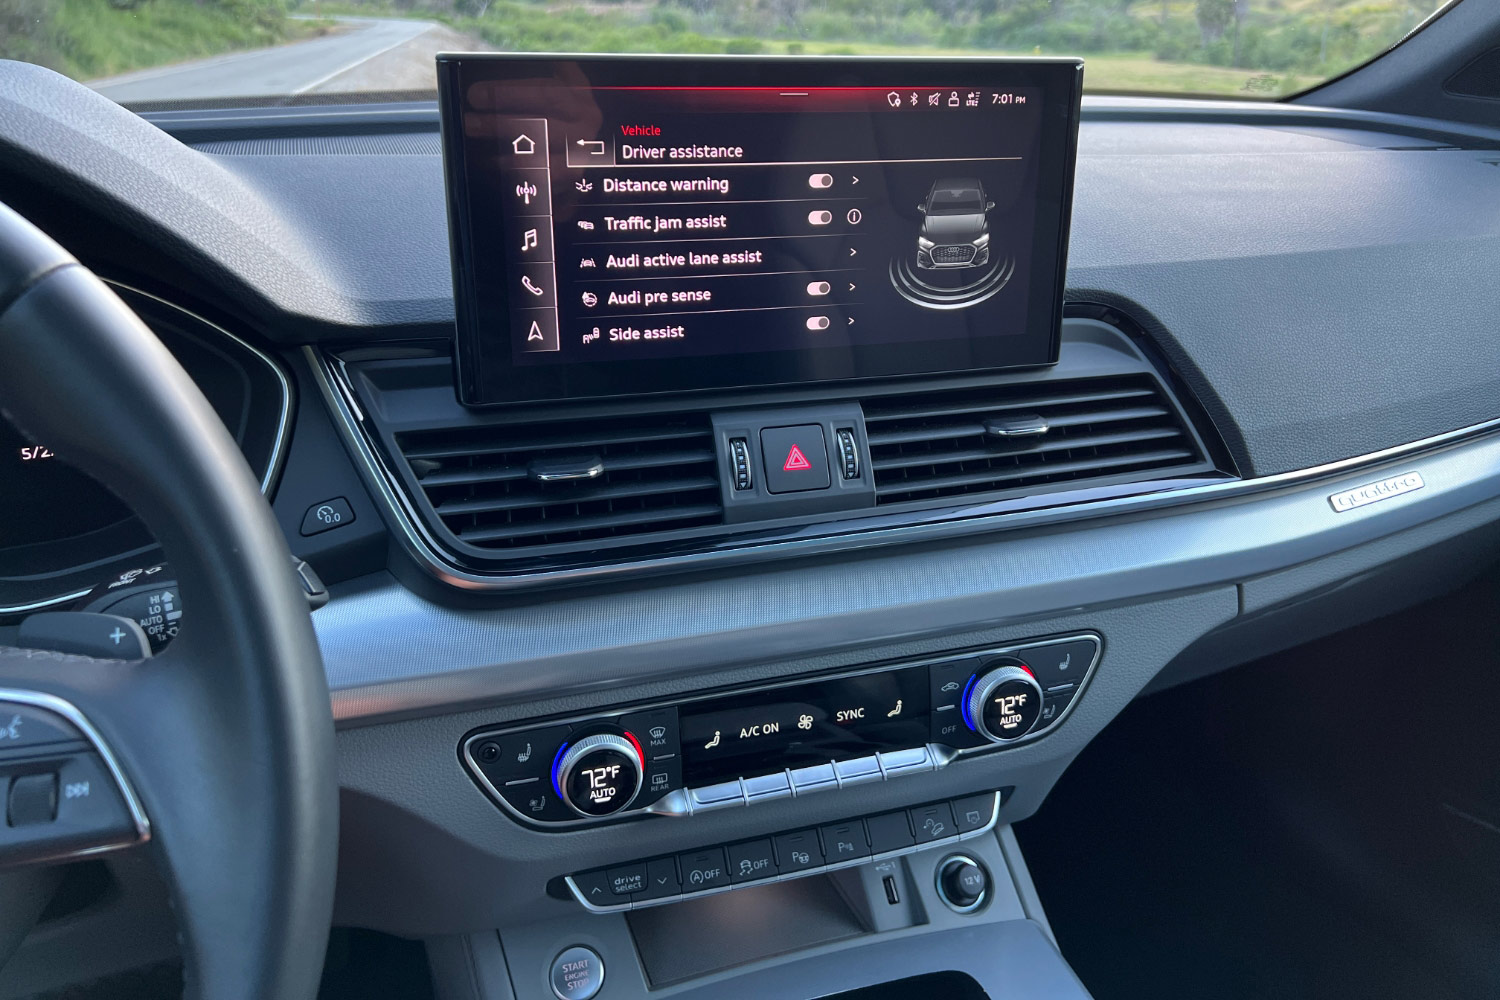 Center infotainment screen in an Audi Q5 showing list of driver assistance systems.